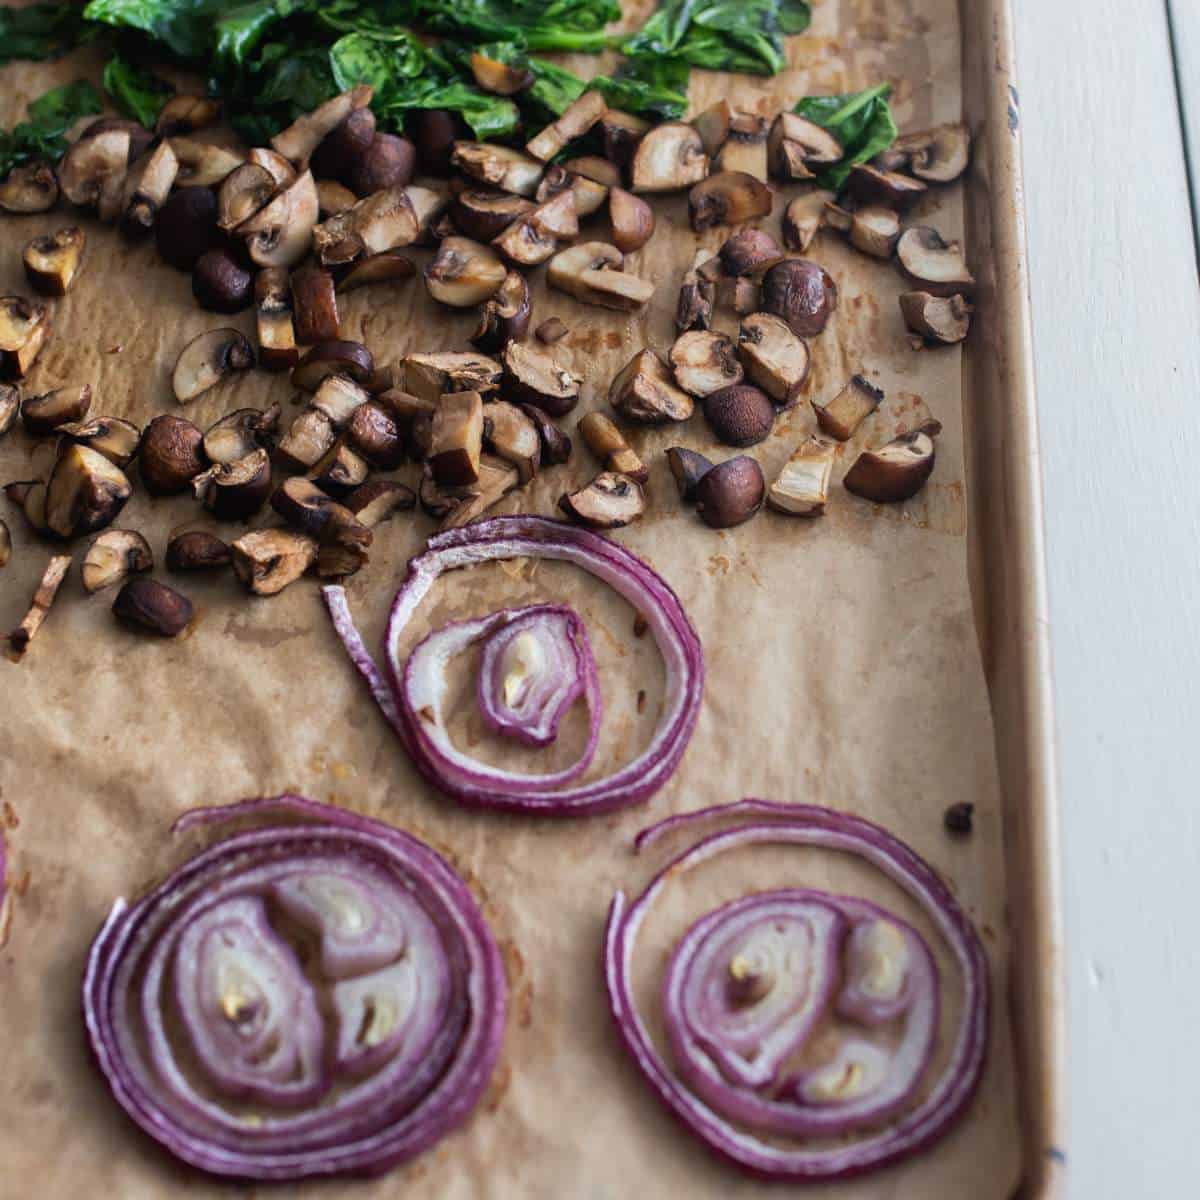 Oven-roasted mushroom, onion and spinach drizzled with olive oil on a baking sheet.